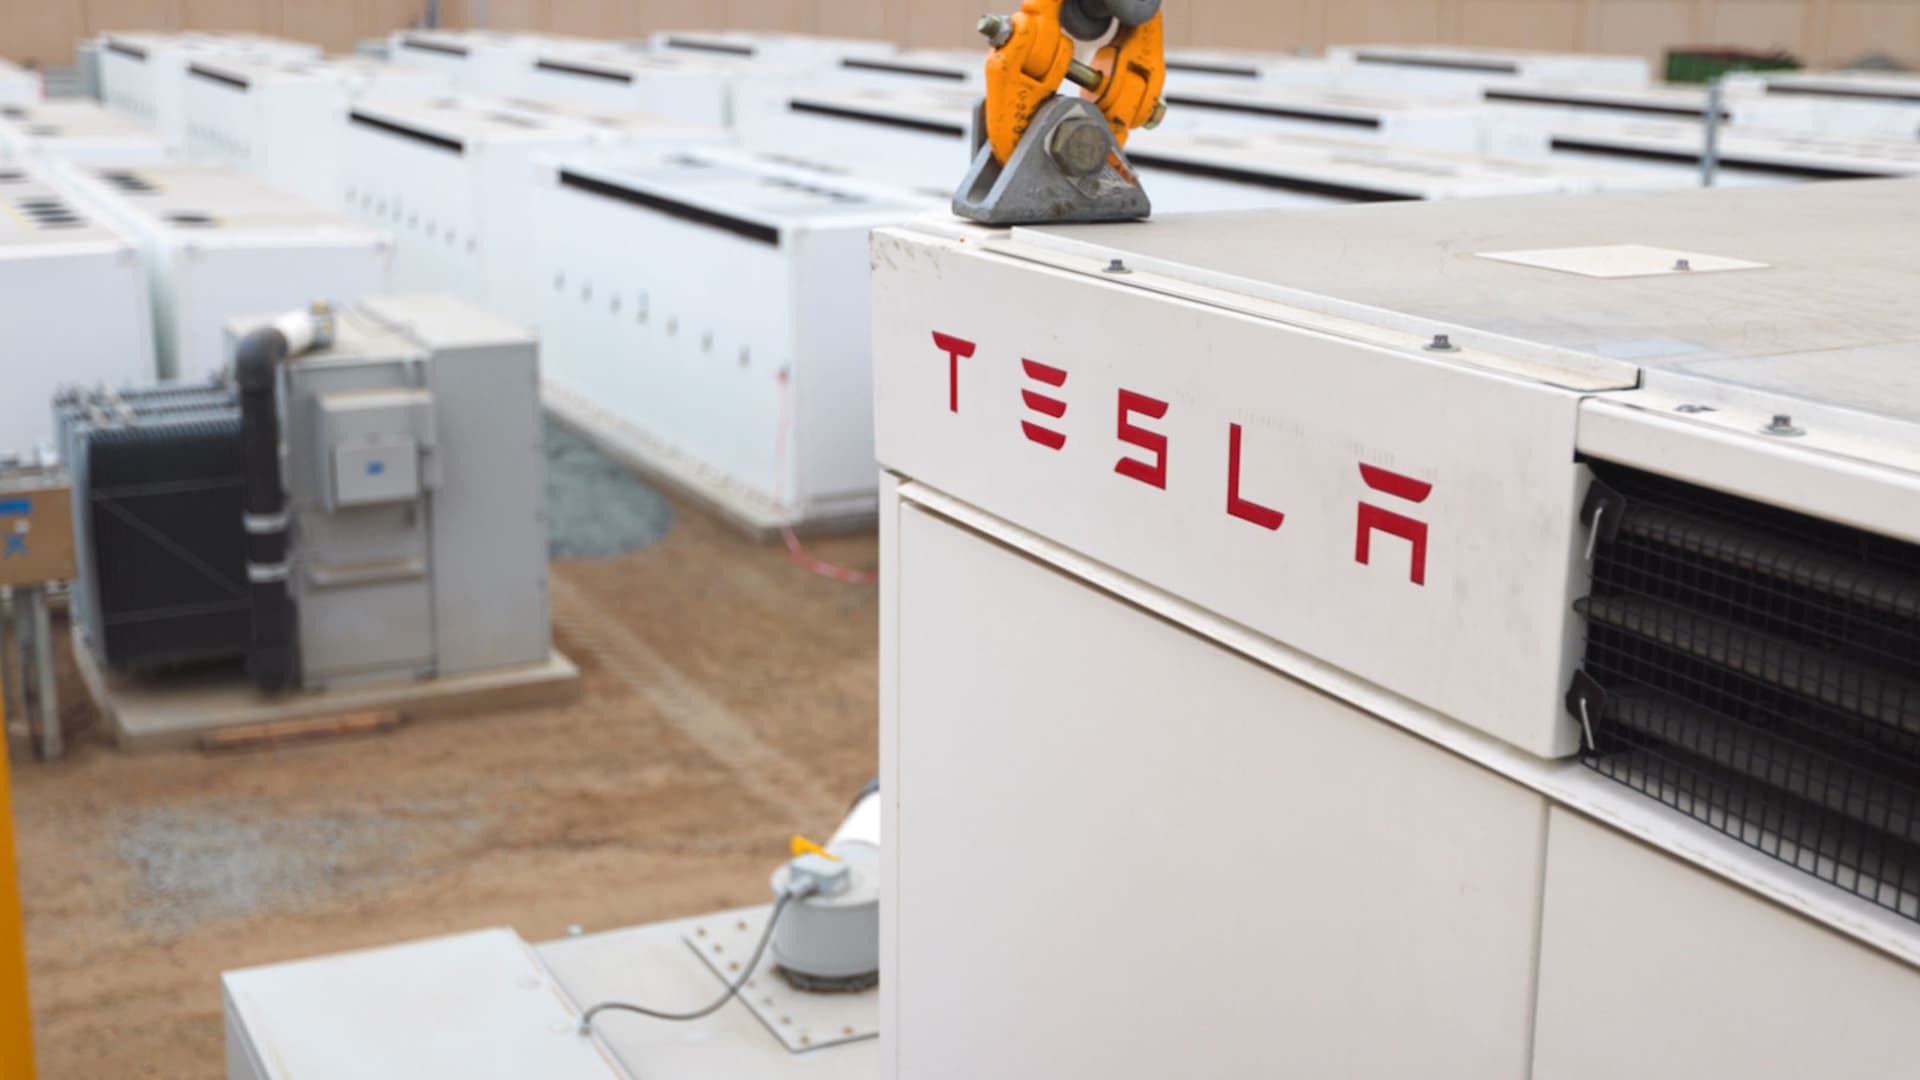 Tesla to open a new Megapack battery factory in Shanghai, company says